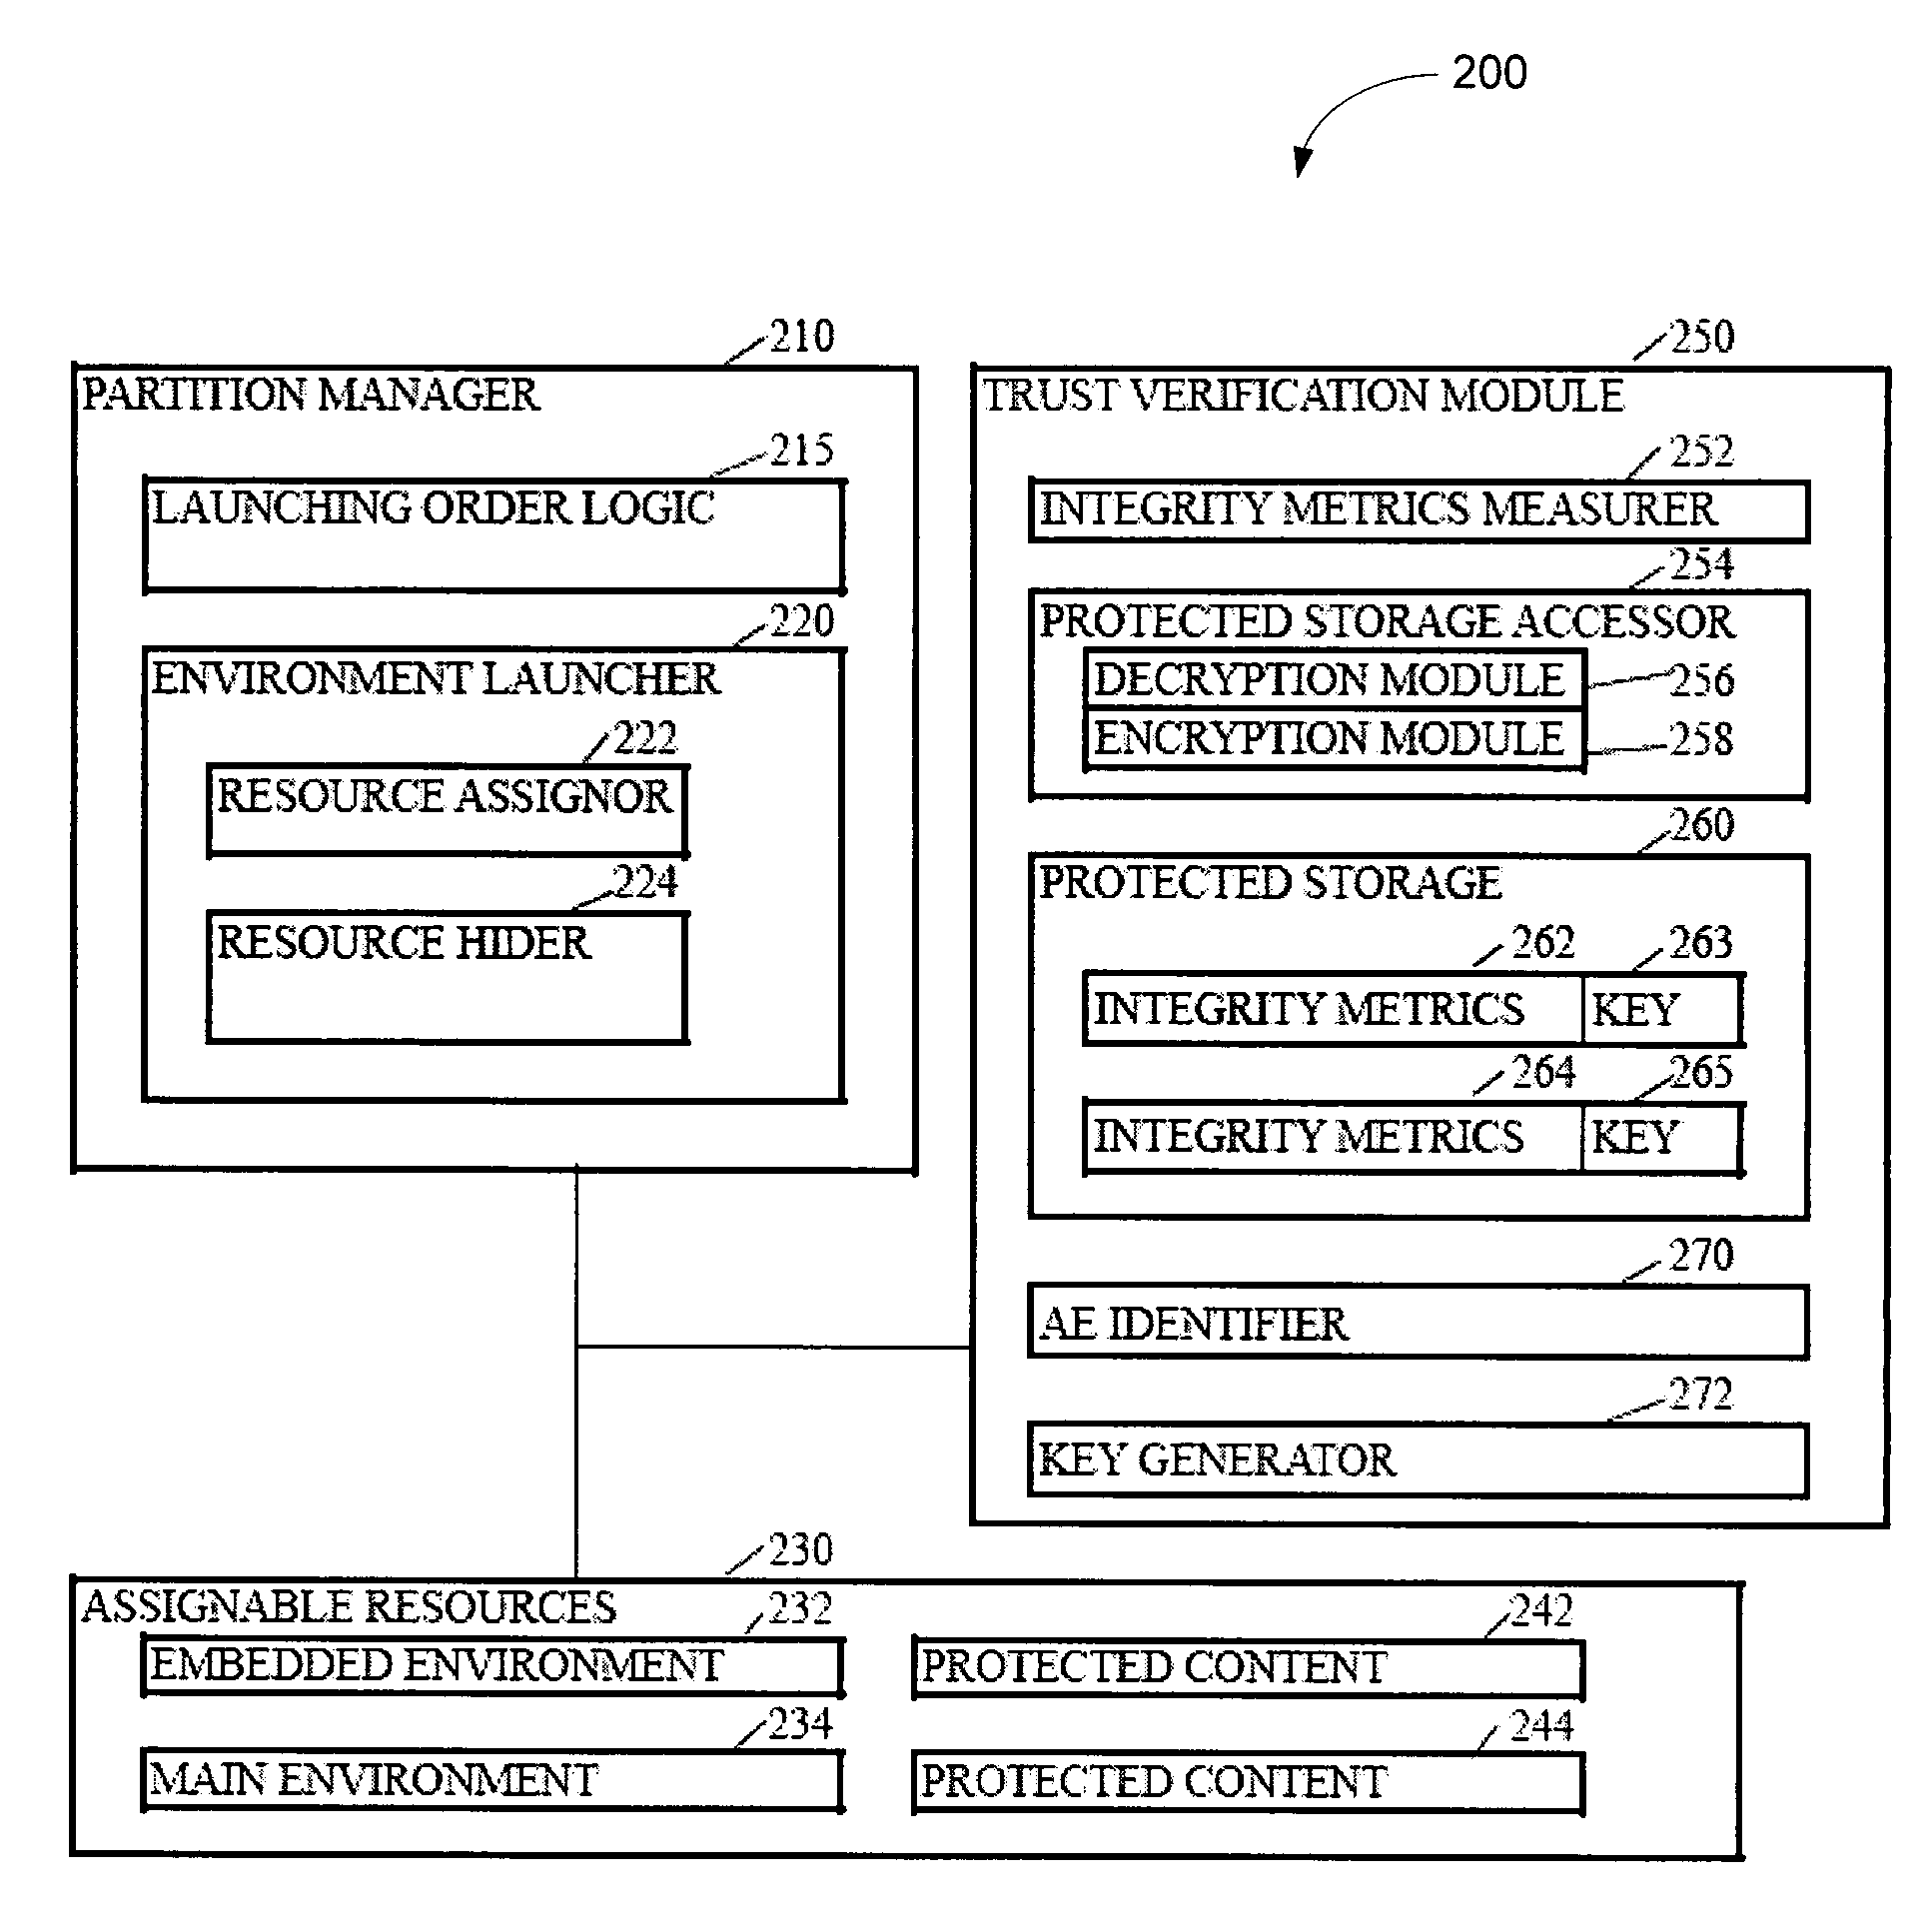 Partitioned scheme for trusted platform module support